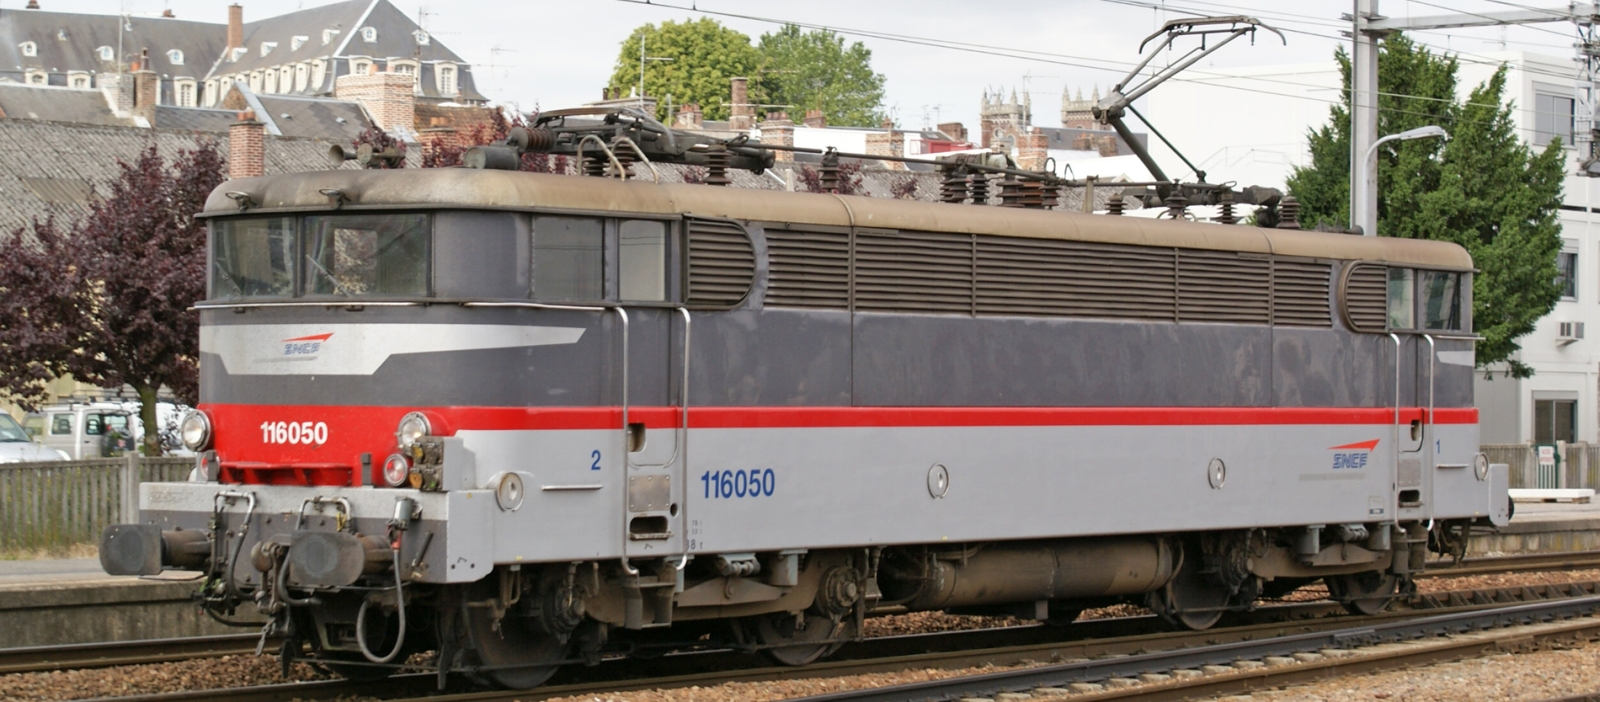 BB 16050 in July 2009 at Amiens